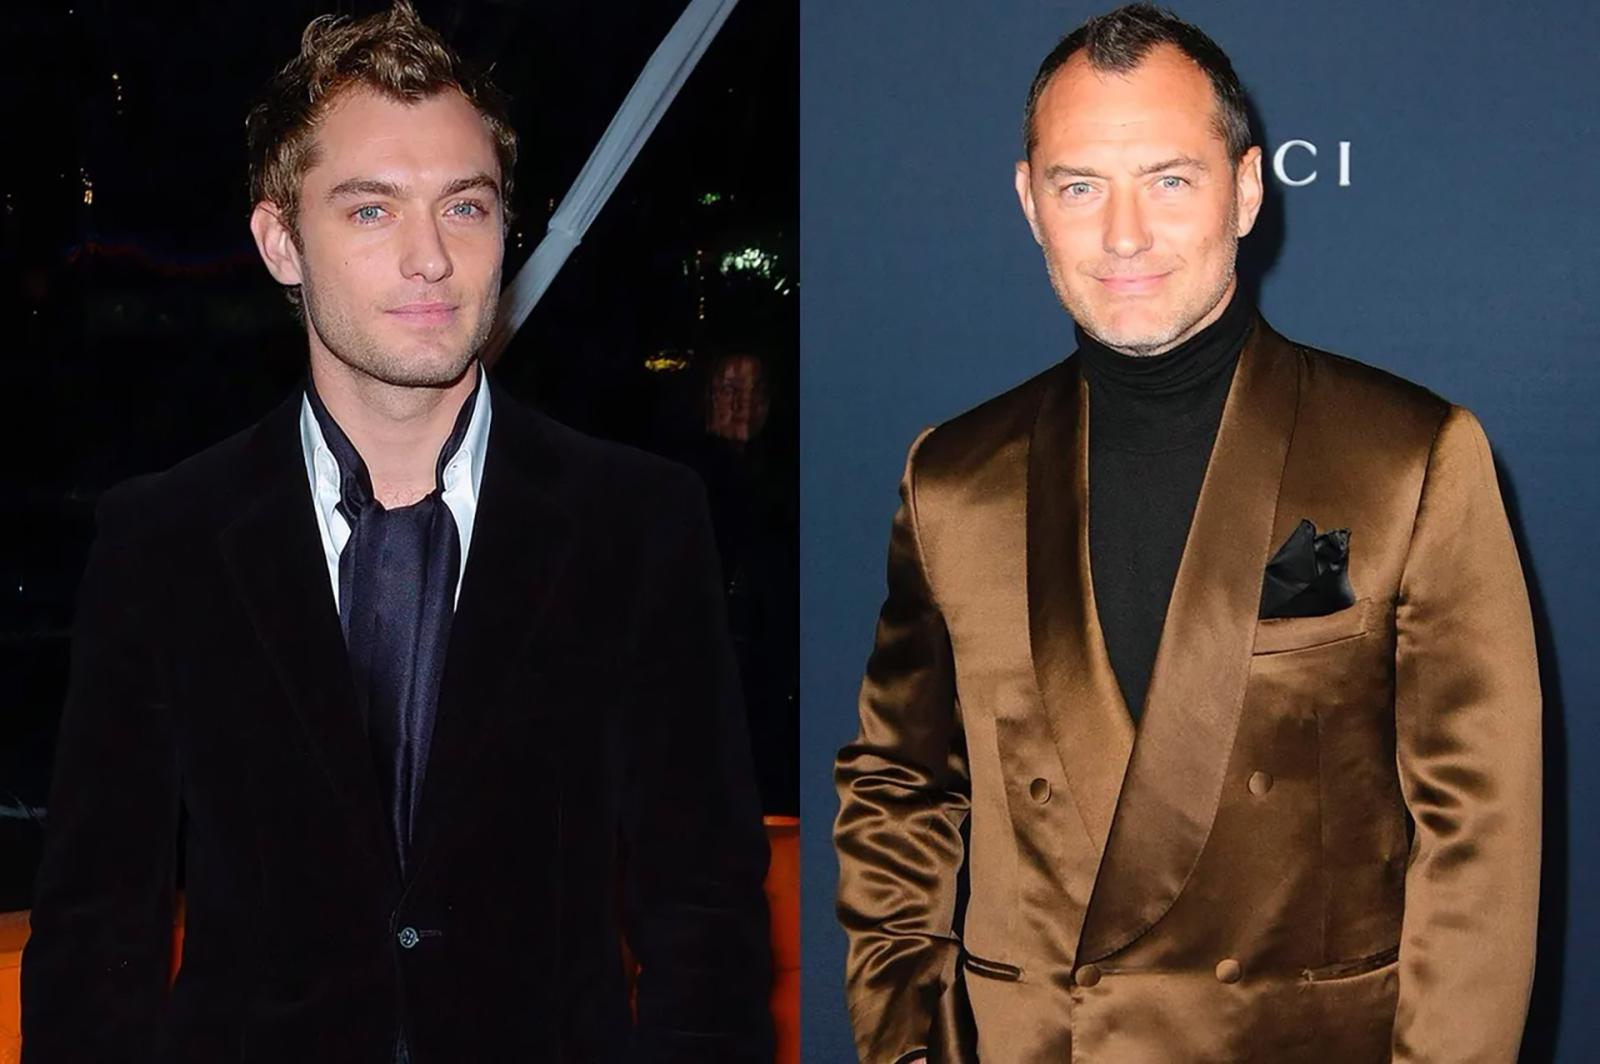 Where Are They Now? The Evolution of the Sexiest Men of the 2000s - image 6